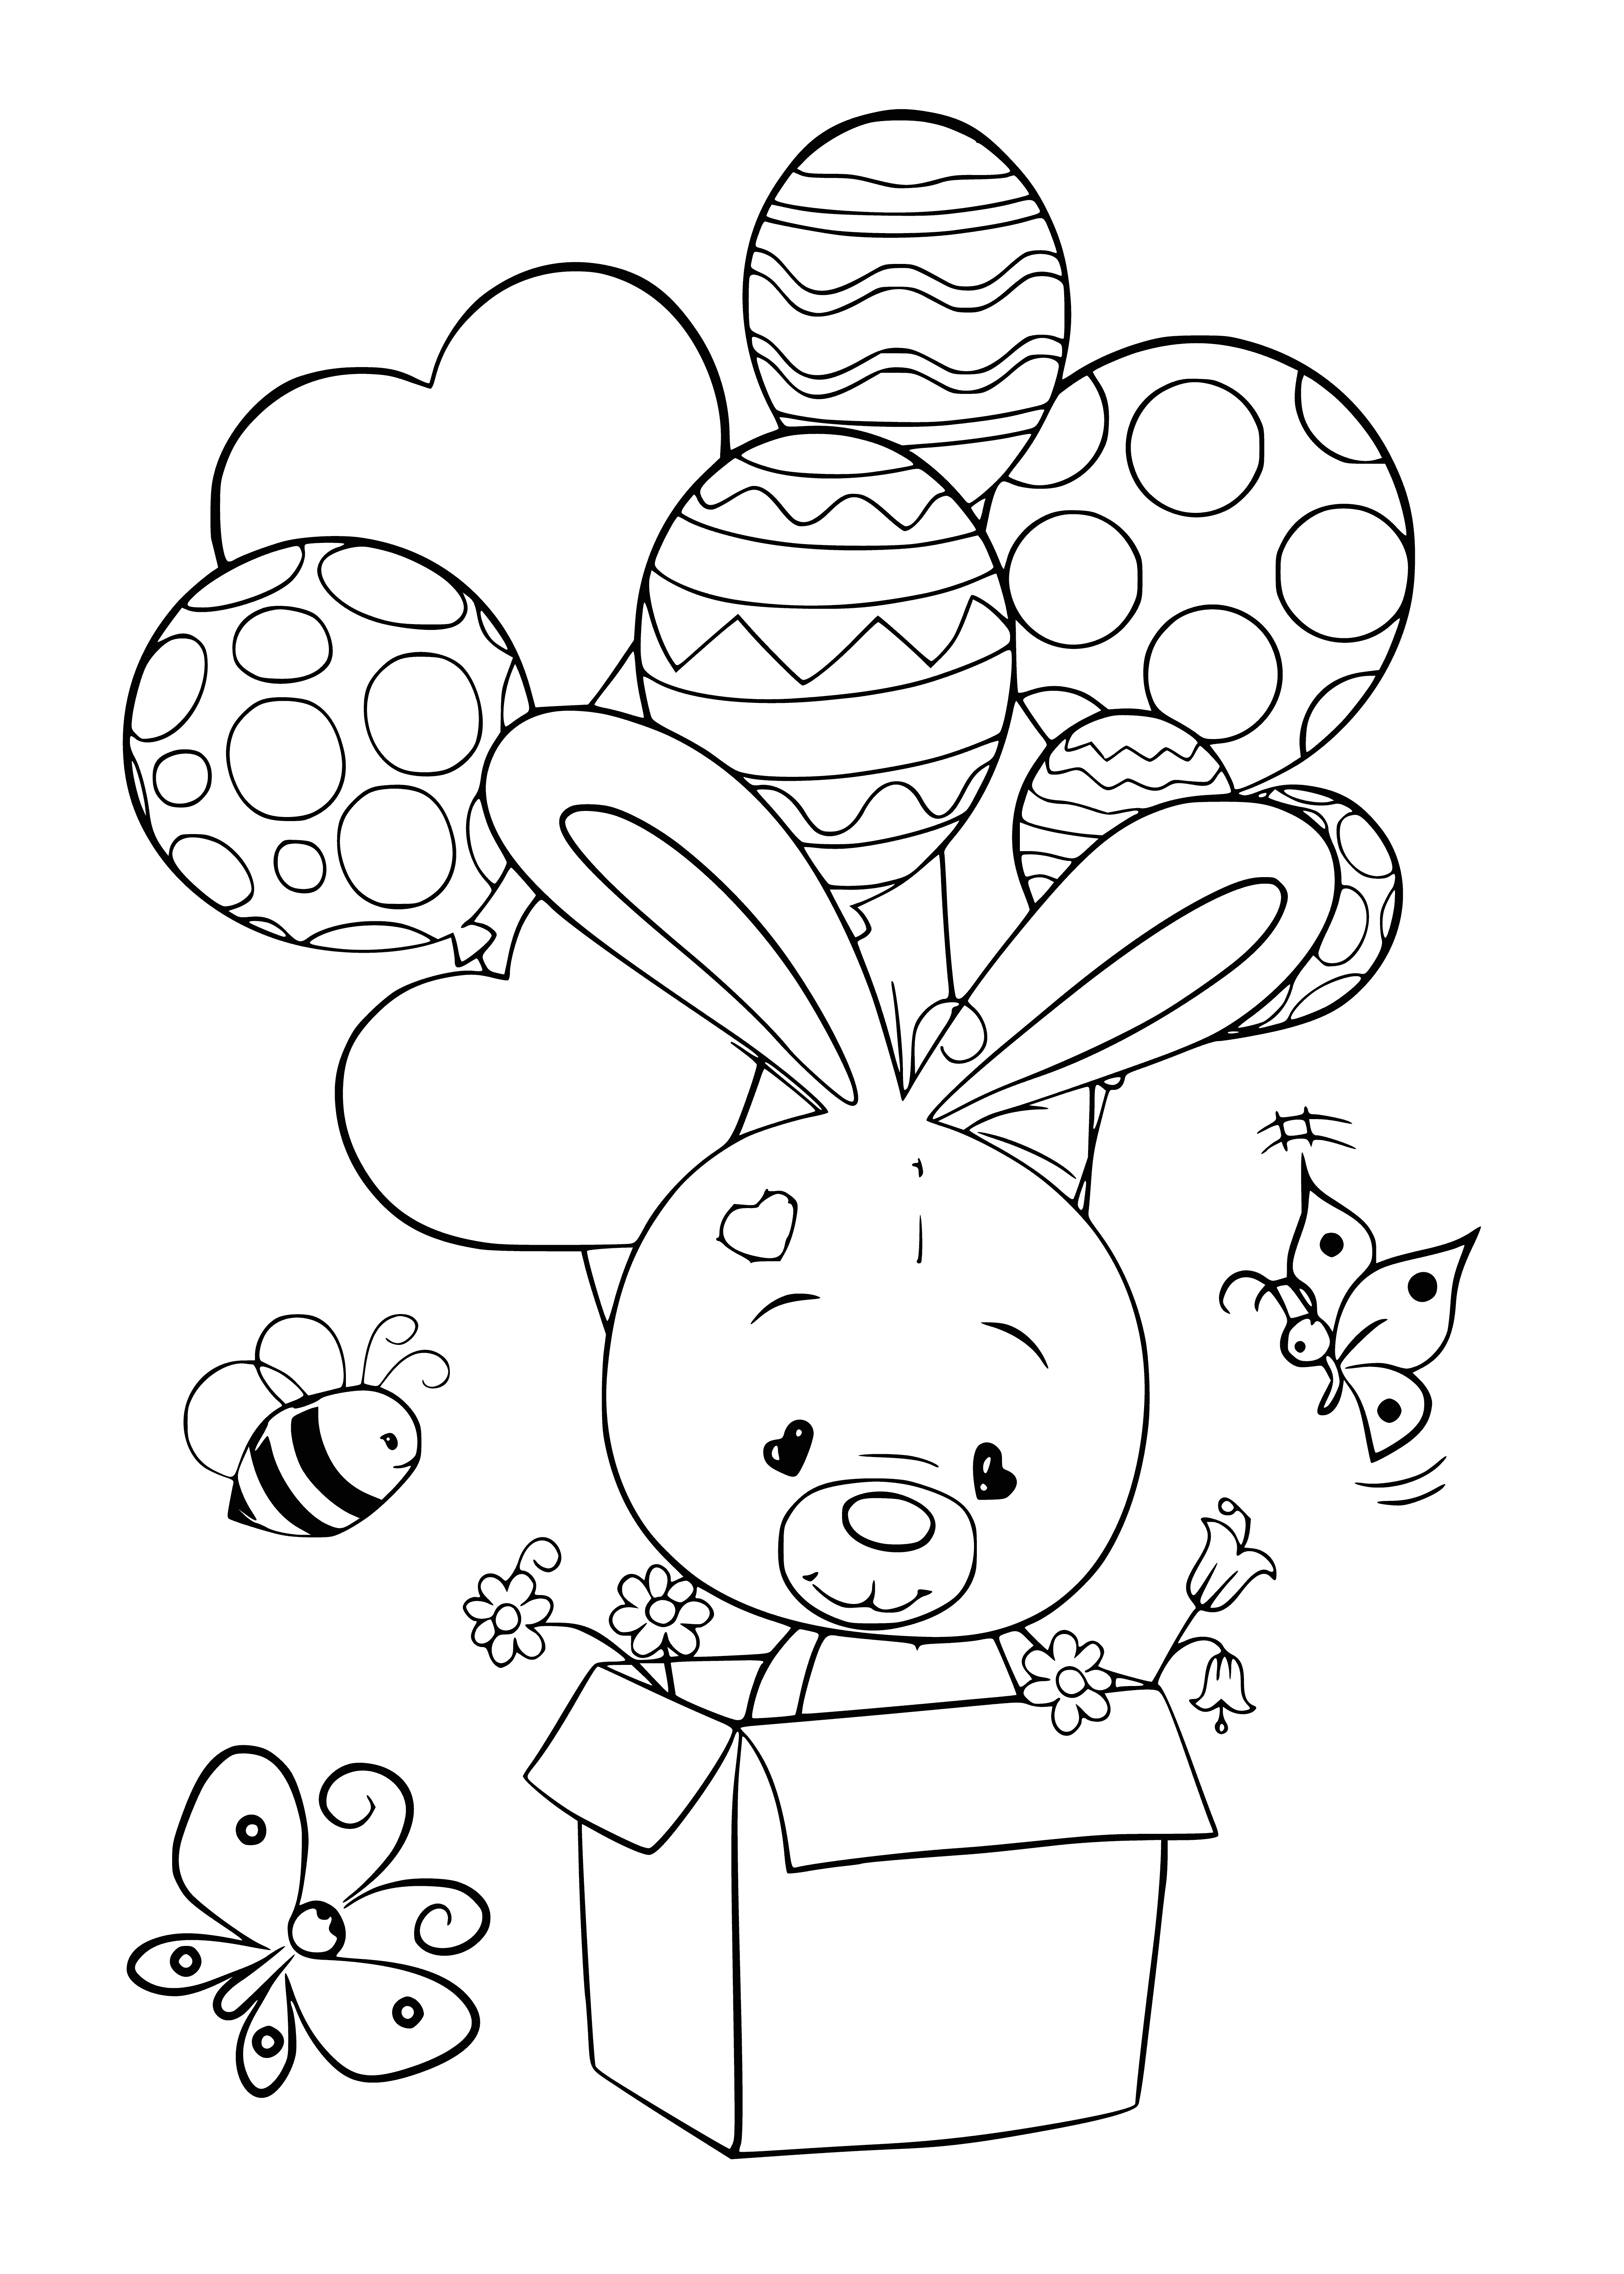 Bunny with balloons coloring page